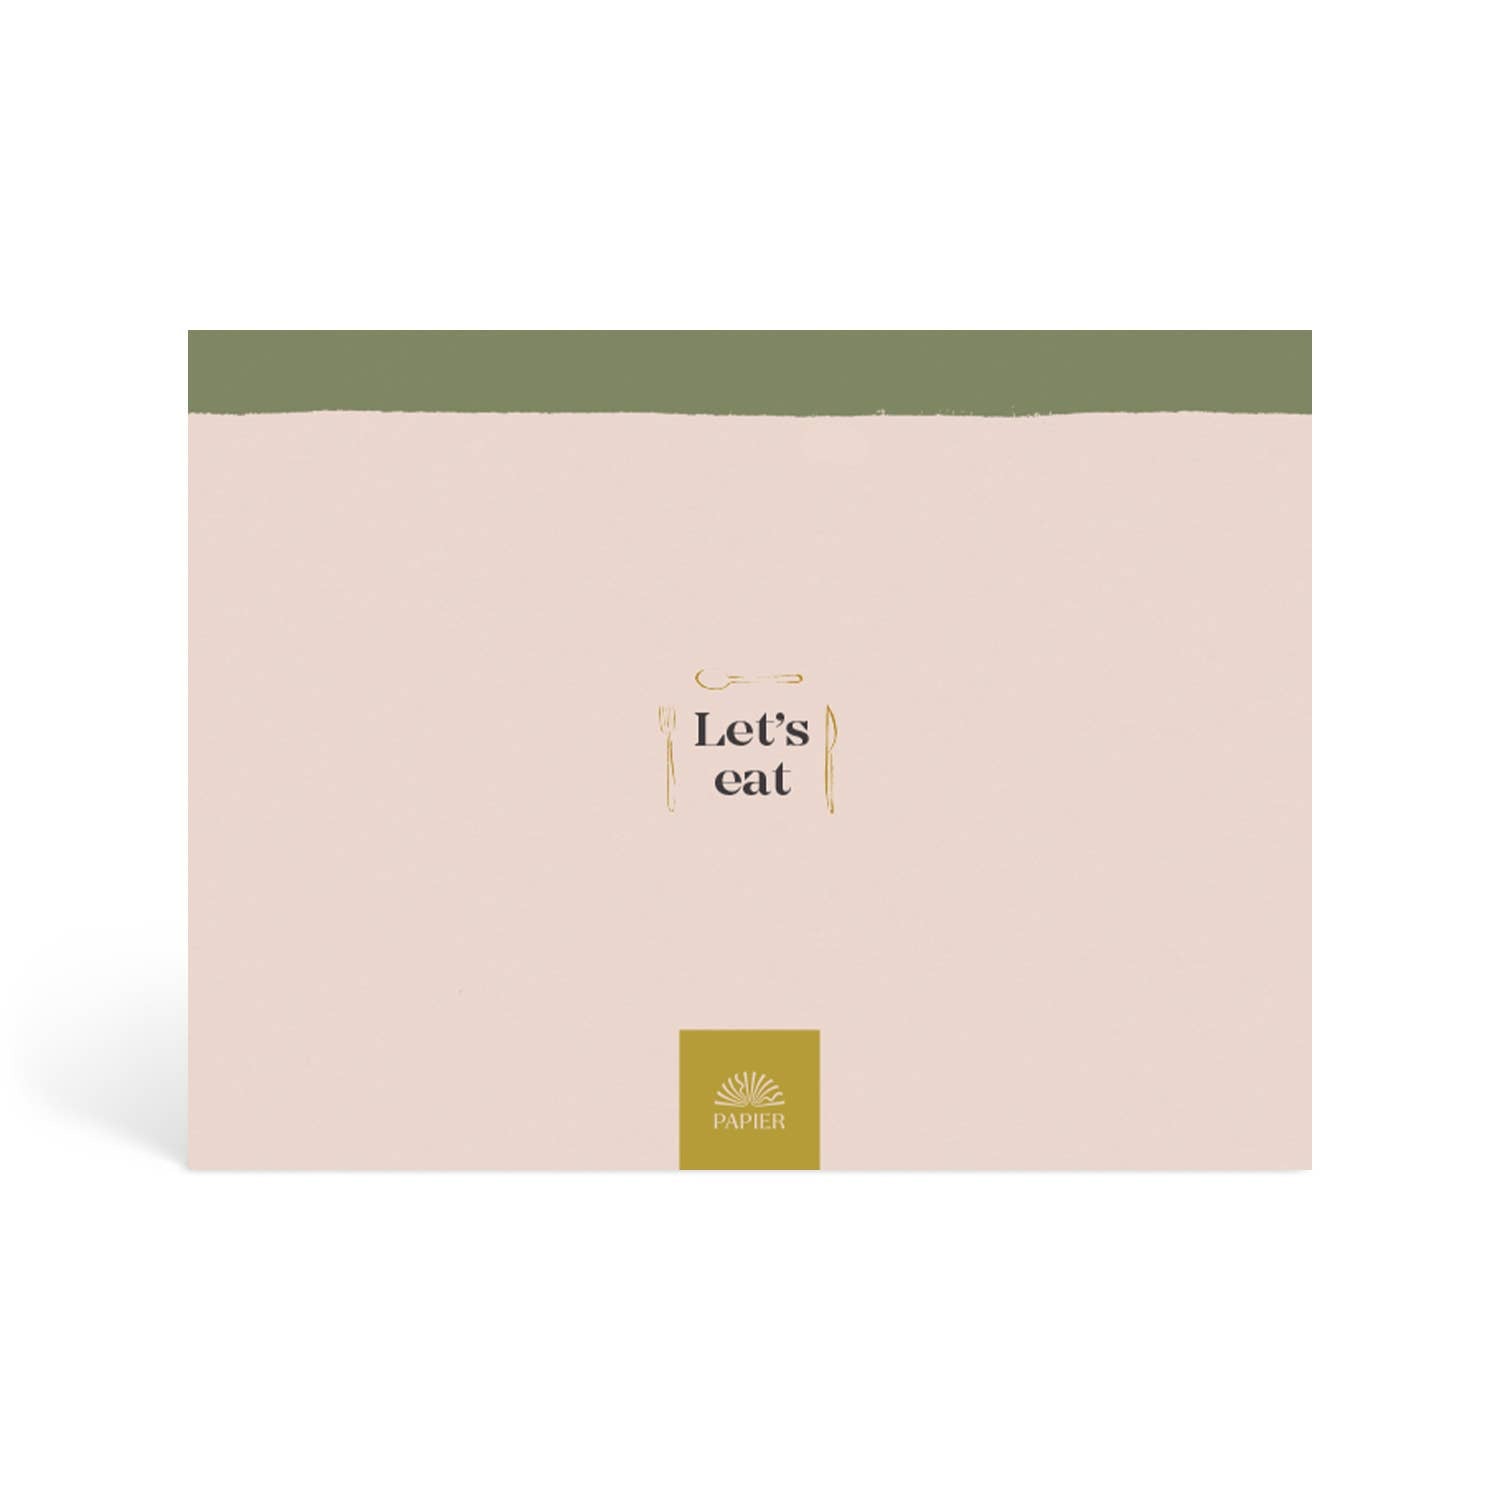 Back cover of Vegetable Medley Meal Planner. Small illustration of fork, knife and spoon framing text "Let's eat" on neutral background, with rustic green stripe along spine. Gold "Papier" logo on the bottom.